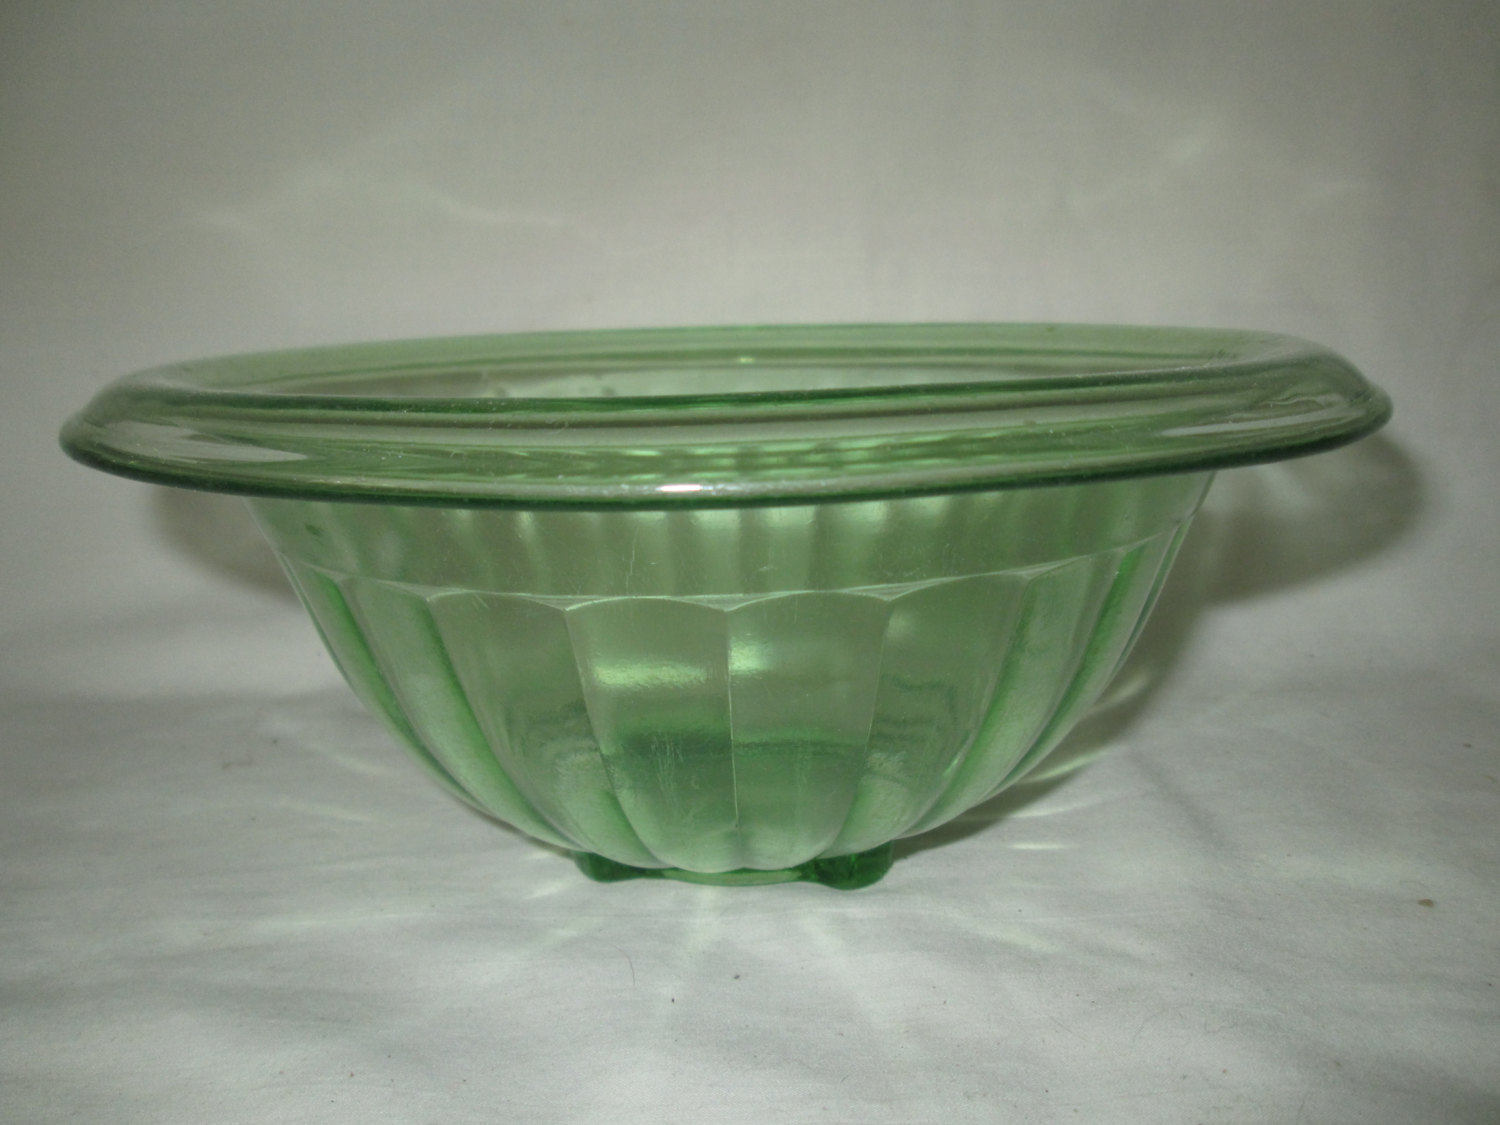 https://www.truevintageantiques.com/wp-content/uploads/2017/06/beautiful-vintage-green-depression-glass-bowl-with-wide-rim-mixing-bowl-594ad8b42.jpg